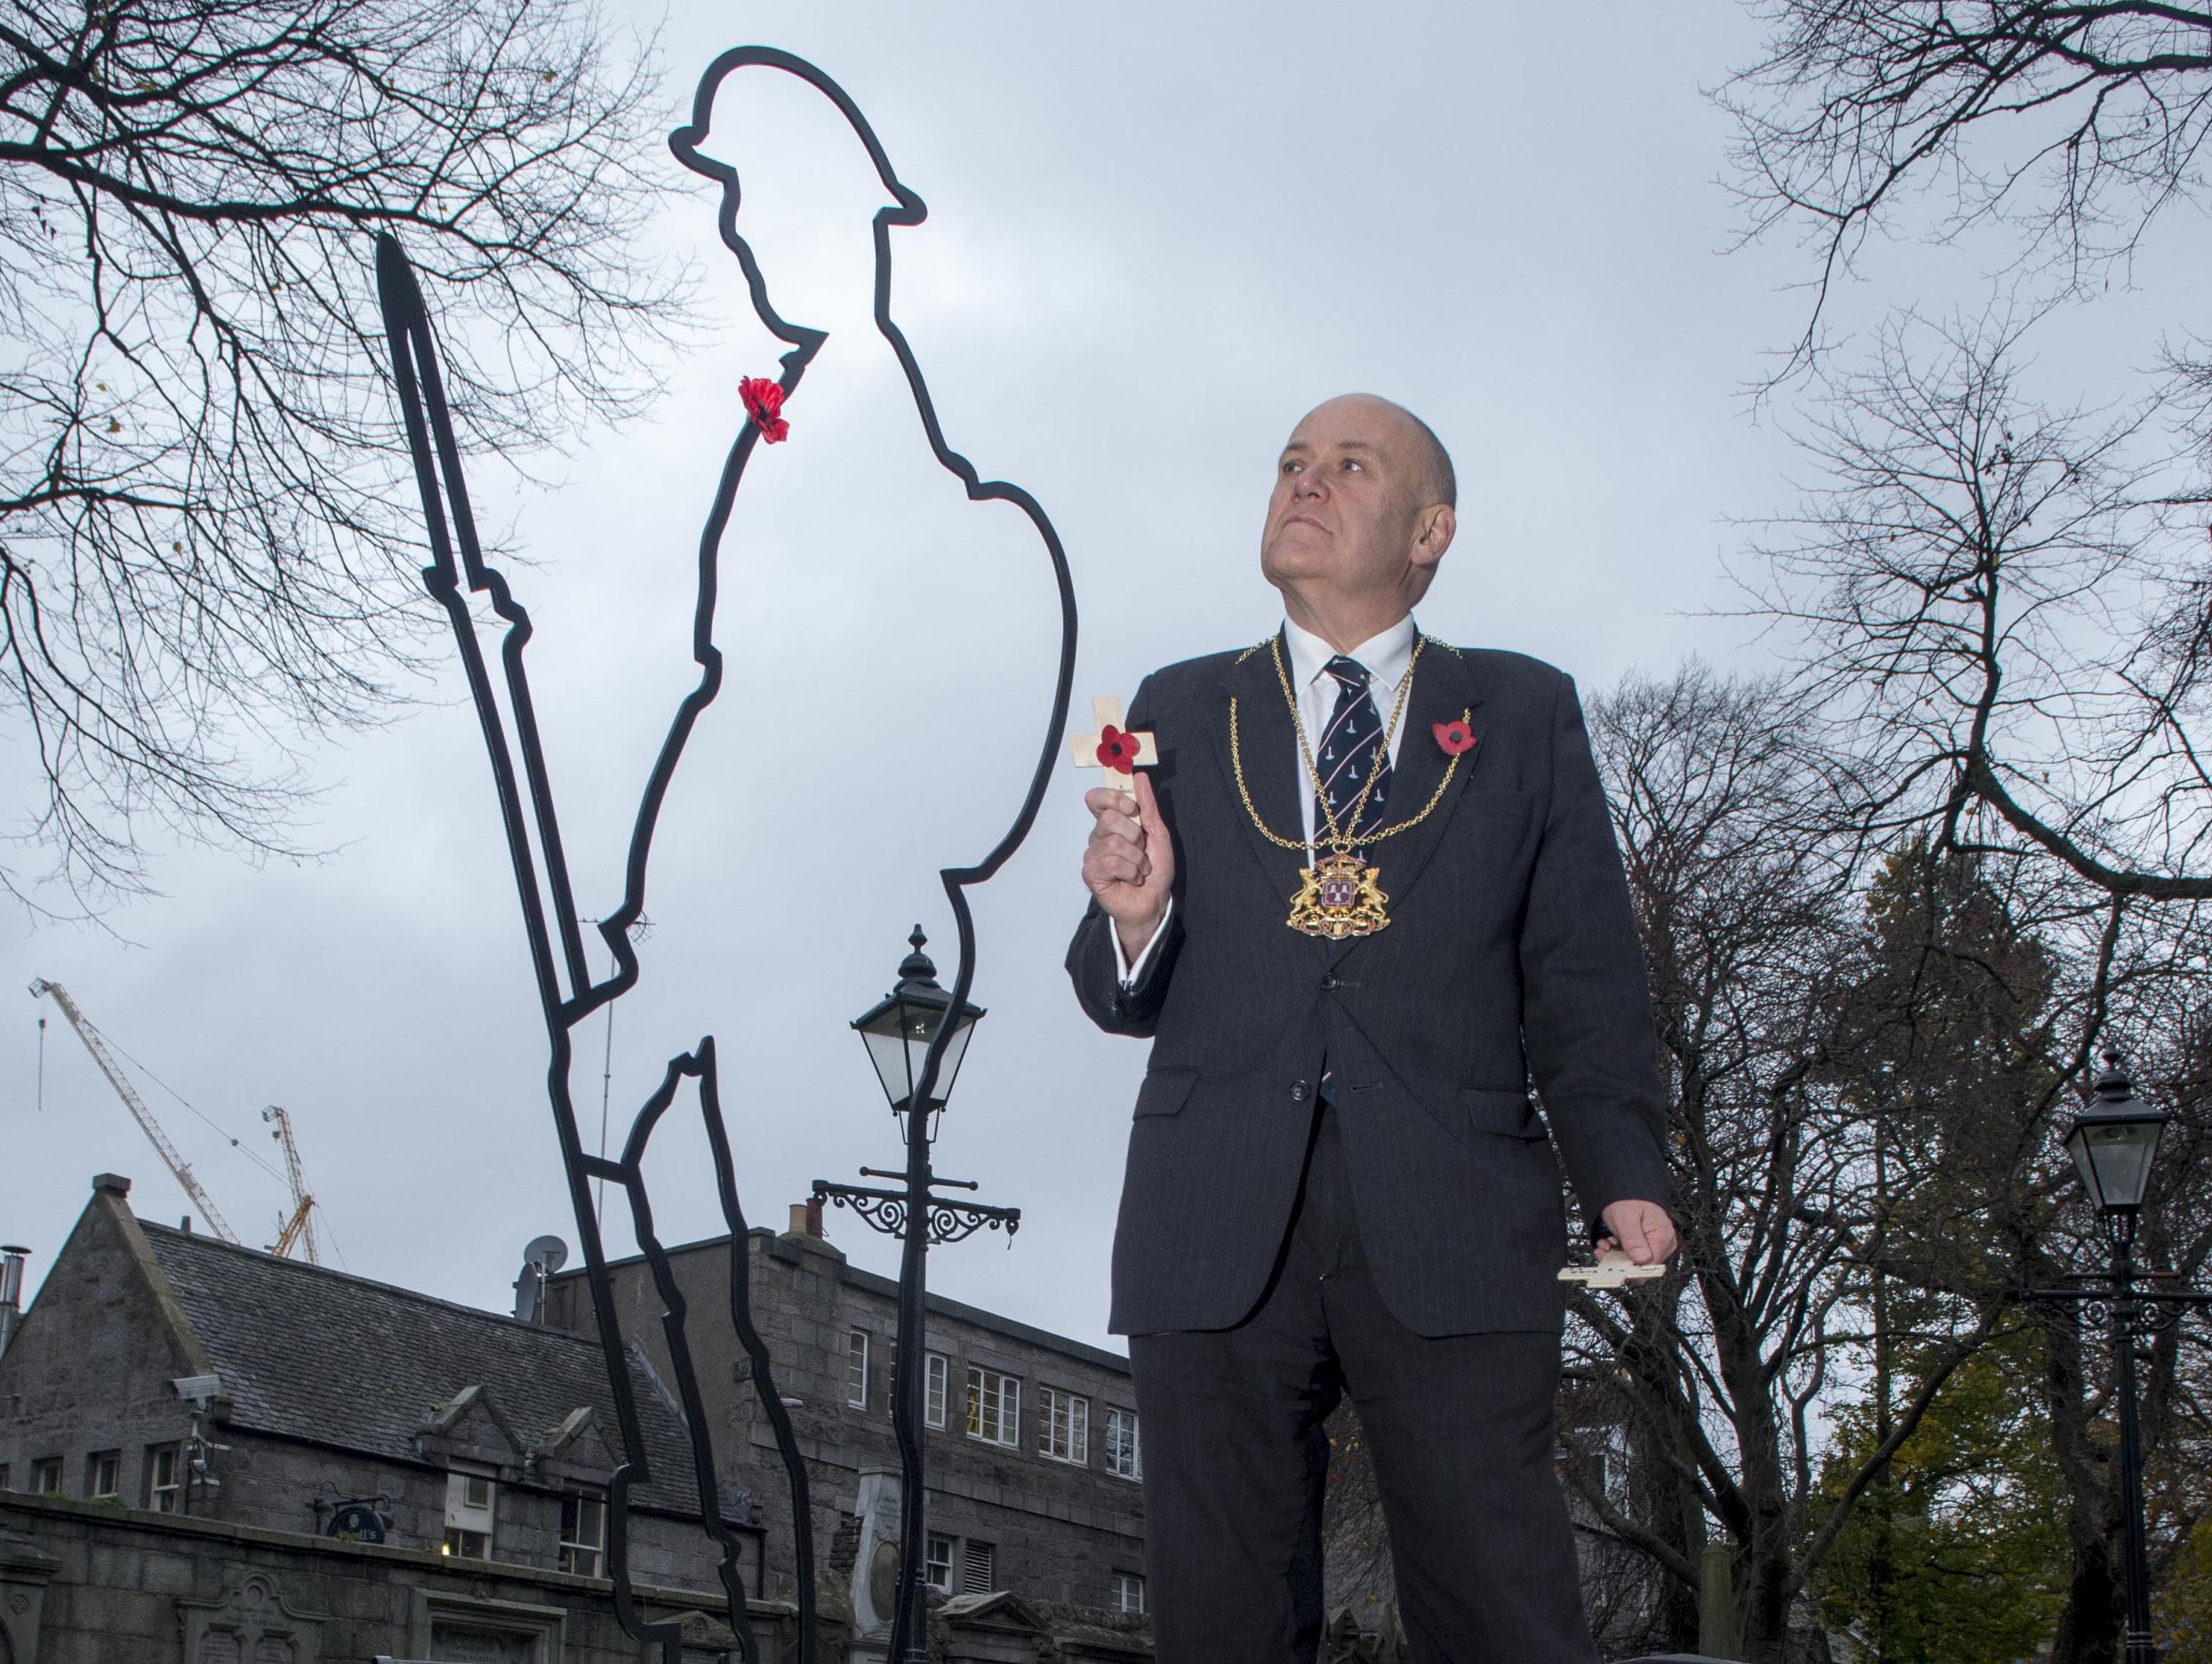 Aberdeen's Lord Provost, Barney Crockett, will lead a remembrance service on Sunday.